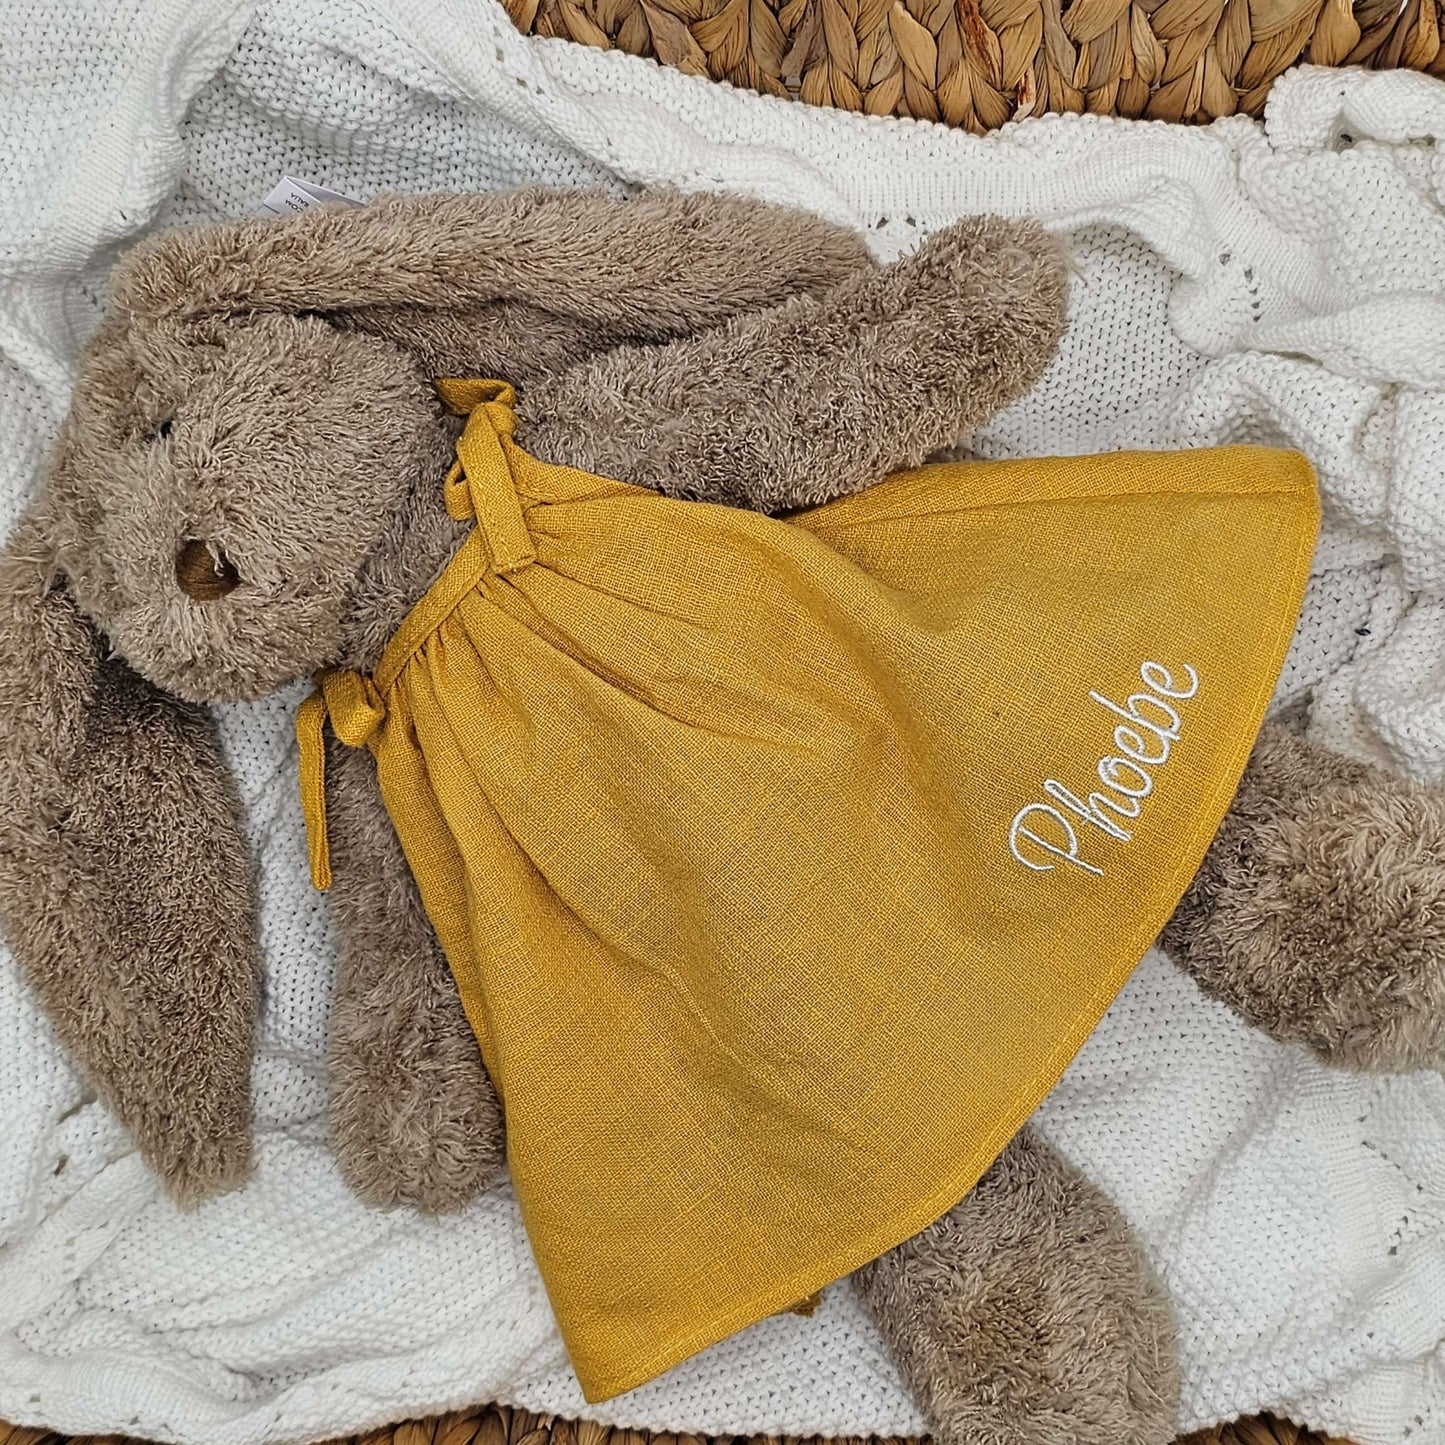 Mrs Honey Bunny wearing mustard dress personalised baby name with embroidery